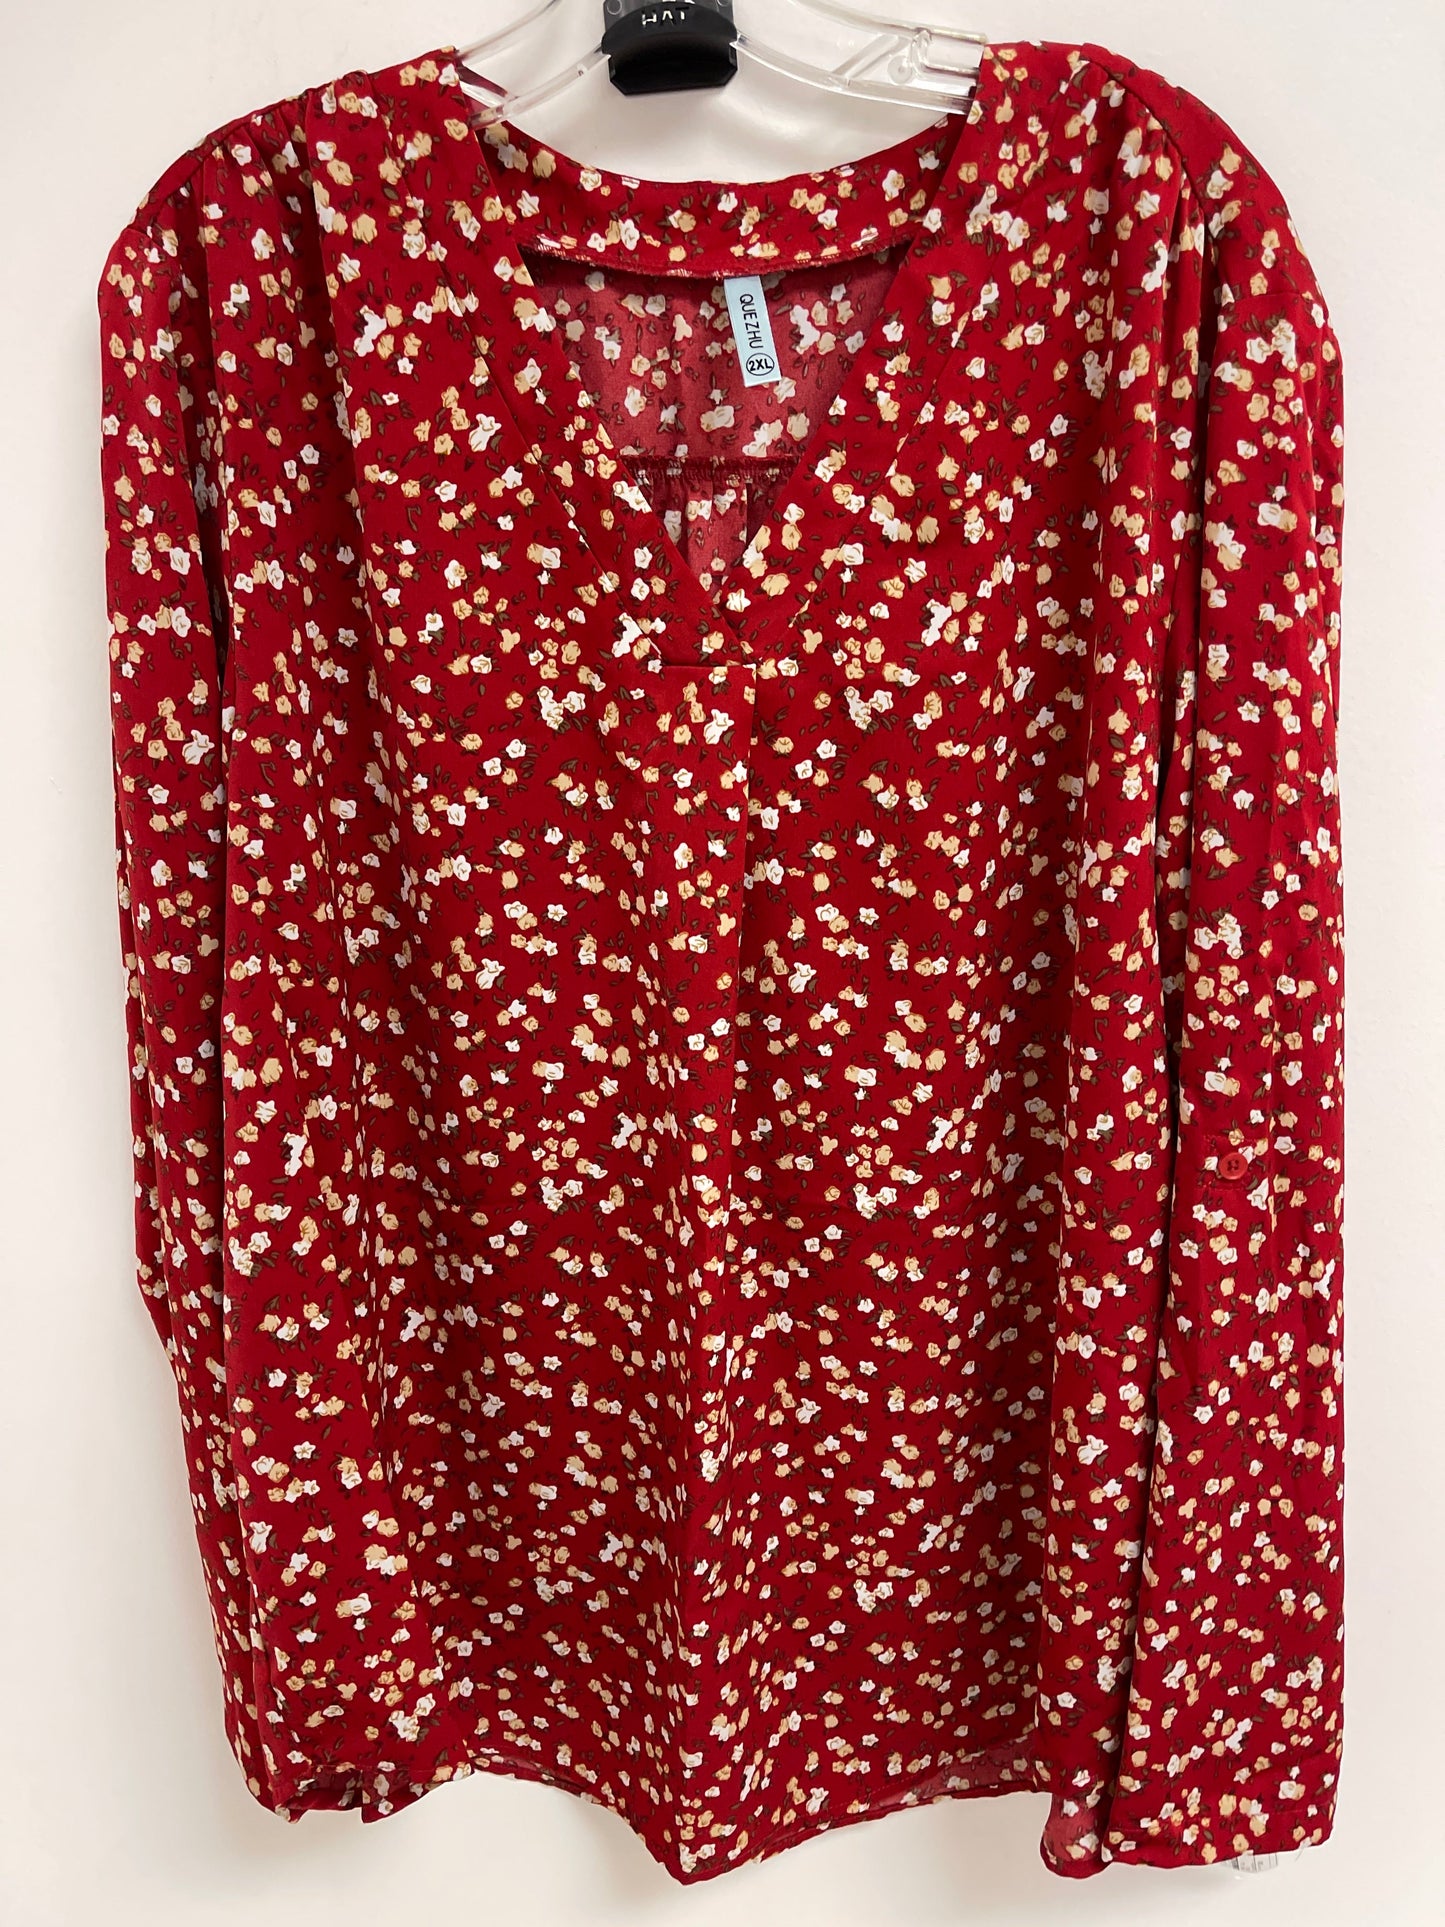 Red Top Long Sleeve Clothes Mentor, Size 2x